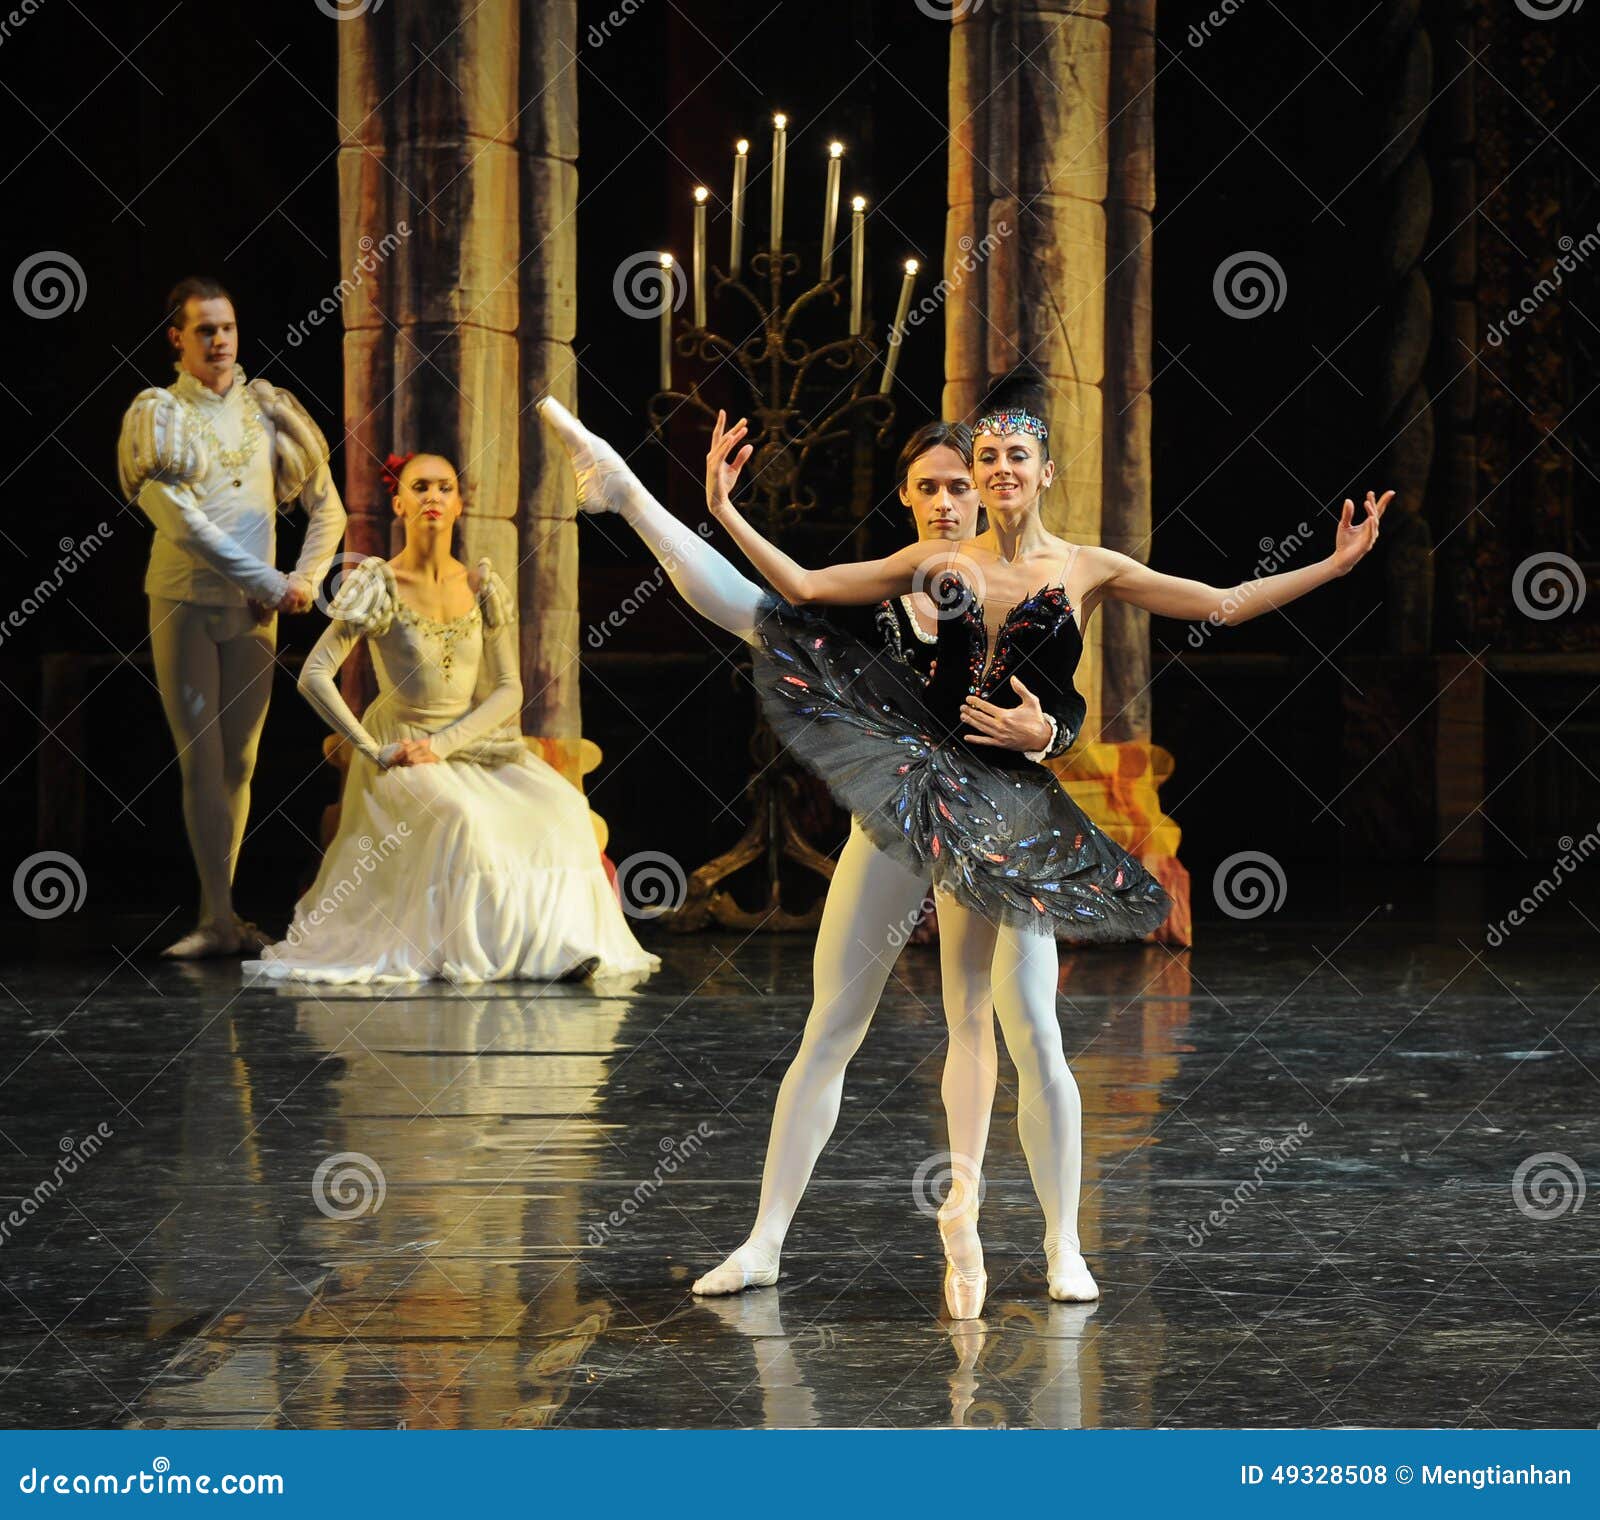 Siegfried and Swan Dance-the Prince Adult Ceremony-ballet Swan Lake Editorial Stock Photo - Image of excellent, 49328508